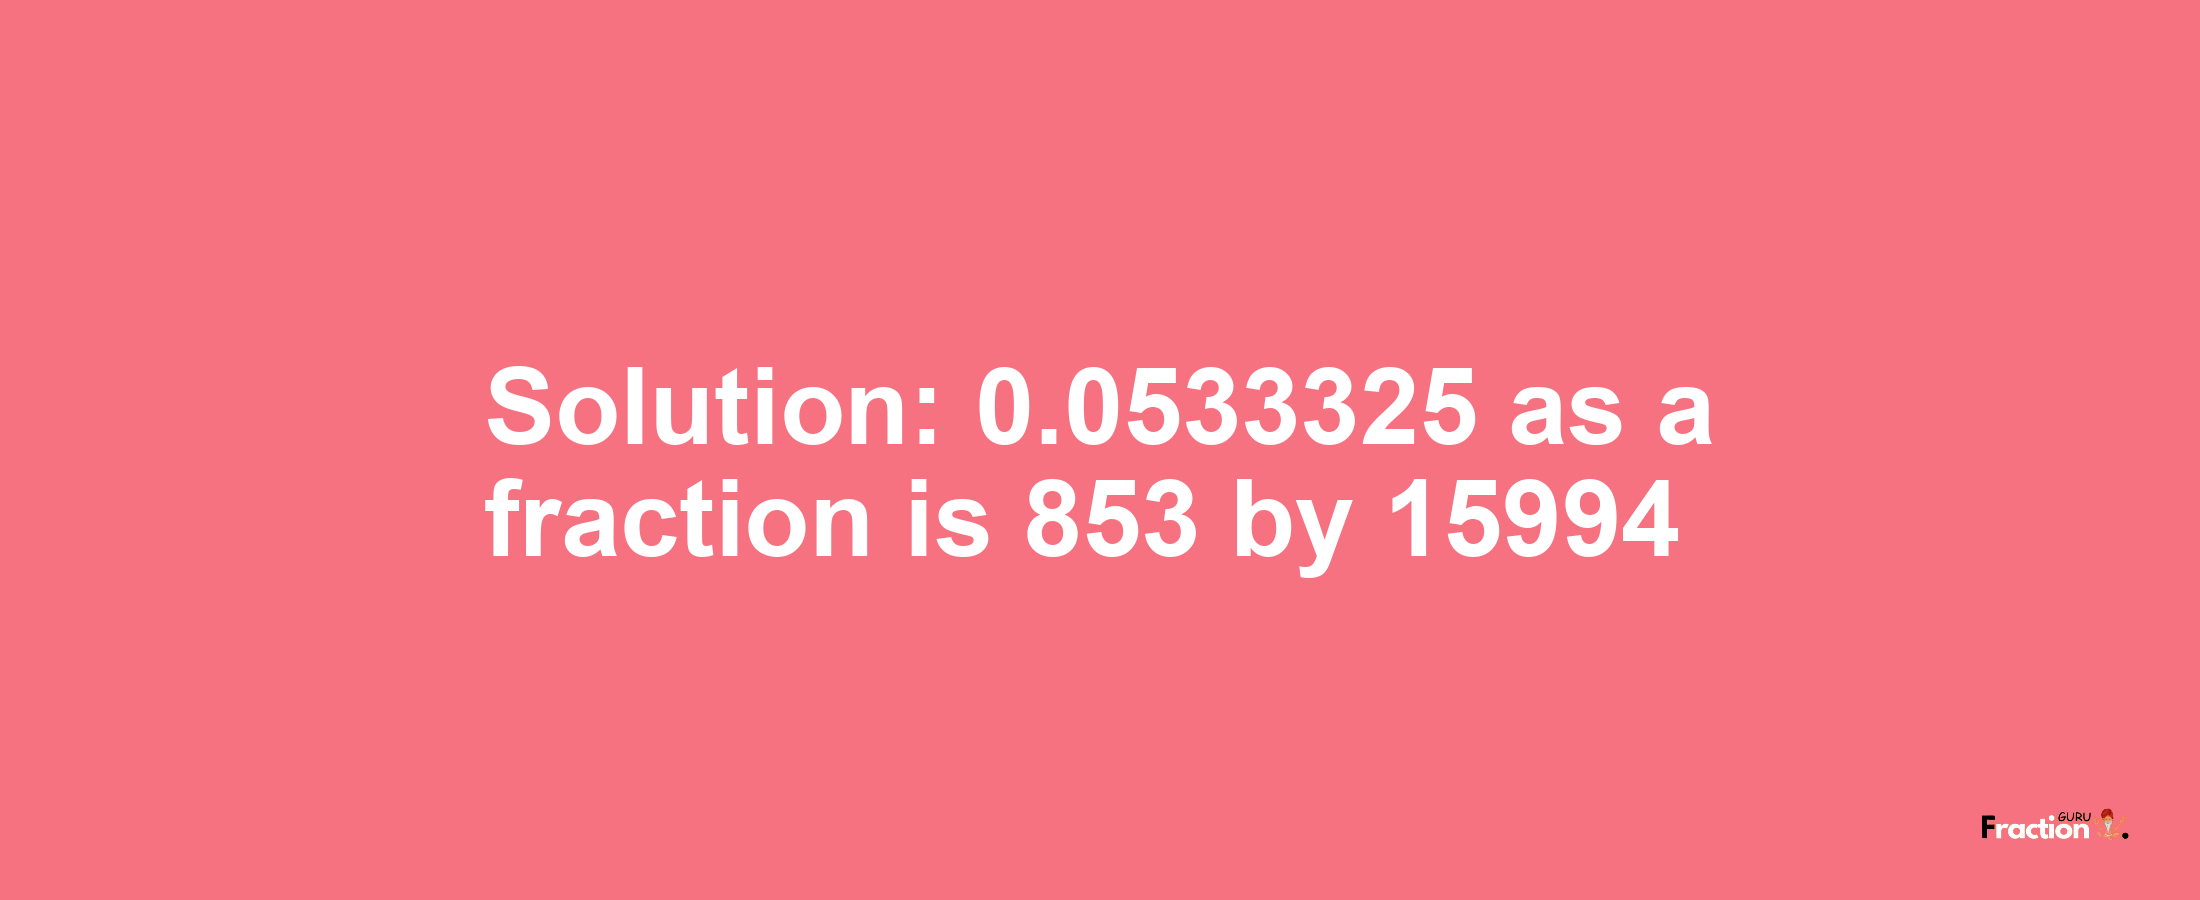 Solution:0.0533325 as a fraction is 853/15994